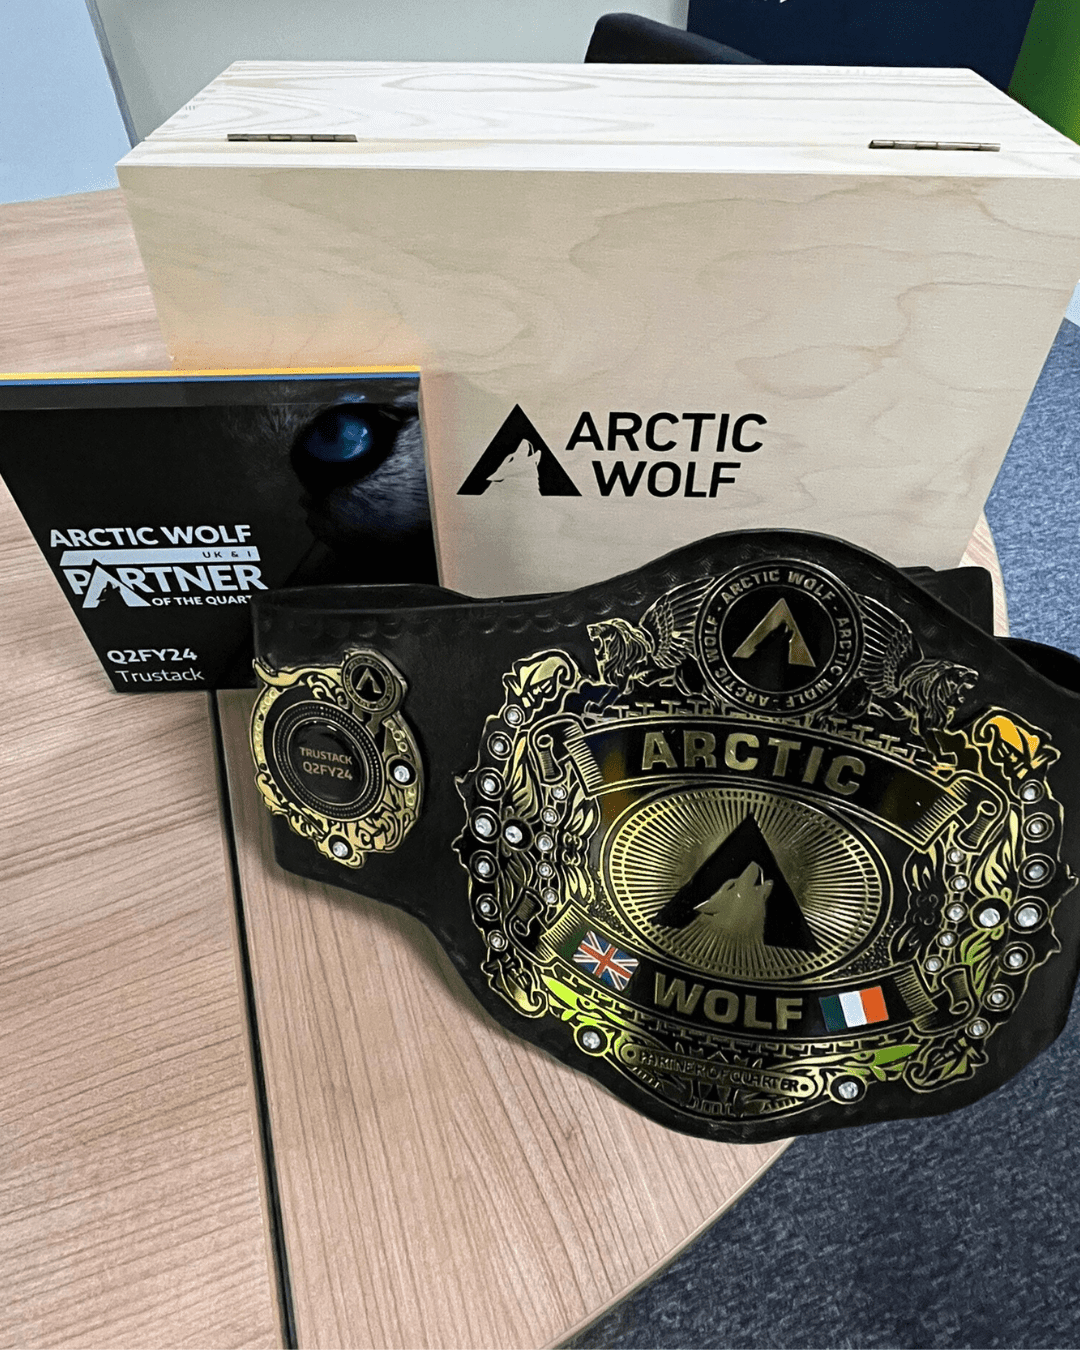 A championship-style belt and a box labeled "Arctic Wolf" are displayed on a wooden table. The belt features elaborate gold detailing and the Arctic Wolf logo. An upright booklet titled "Arctic Wolf EMEA Partner of the Quarter Q2 FY24" is beside the belt.